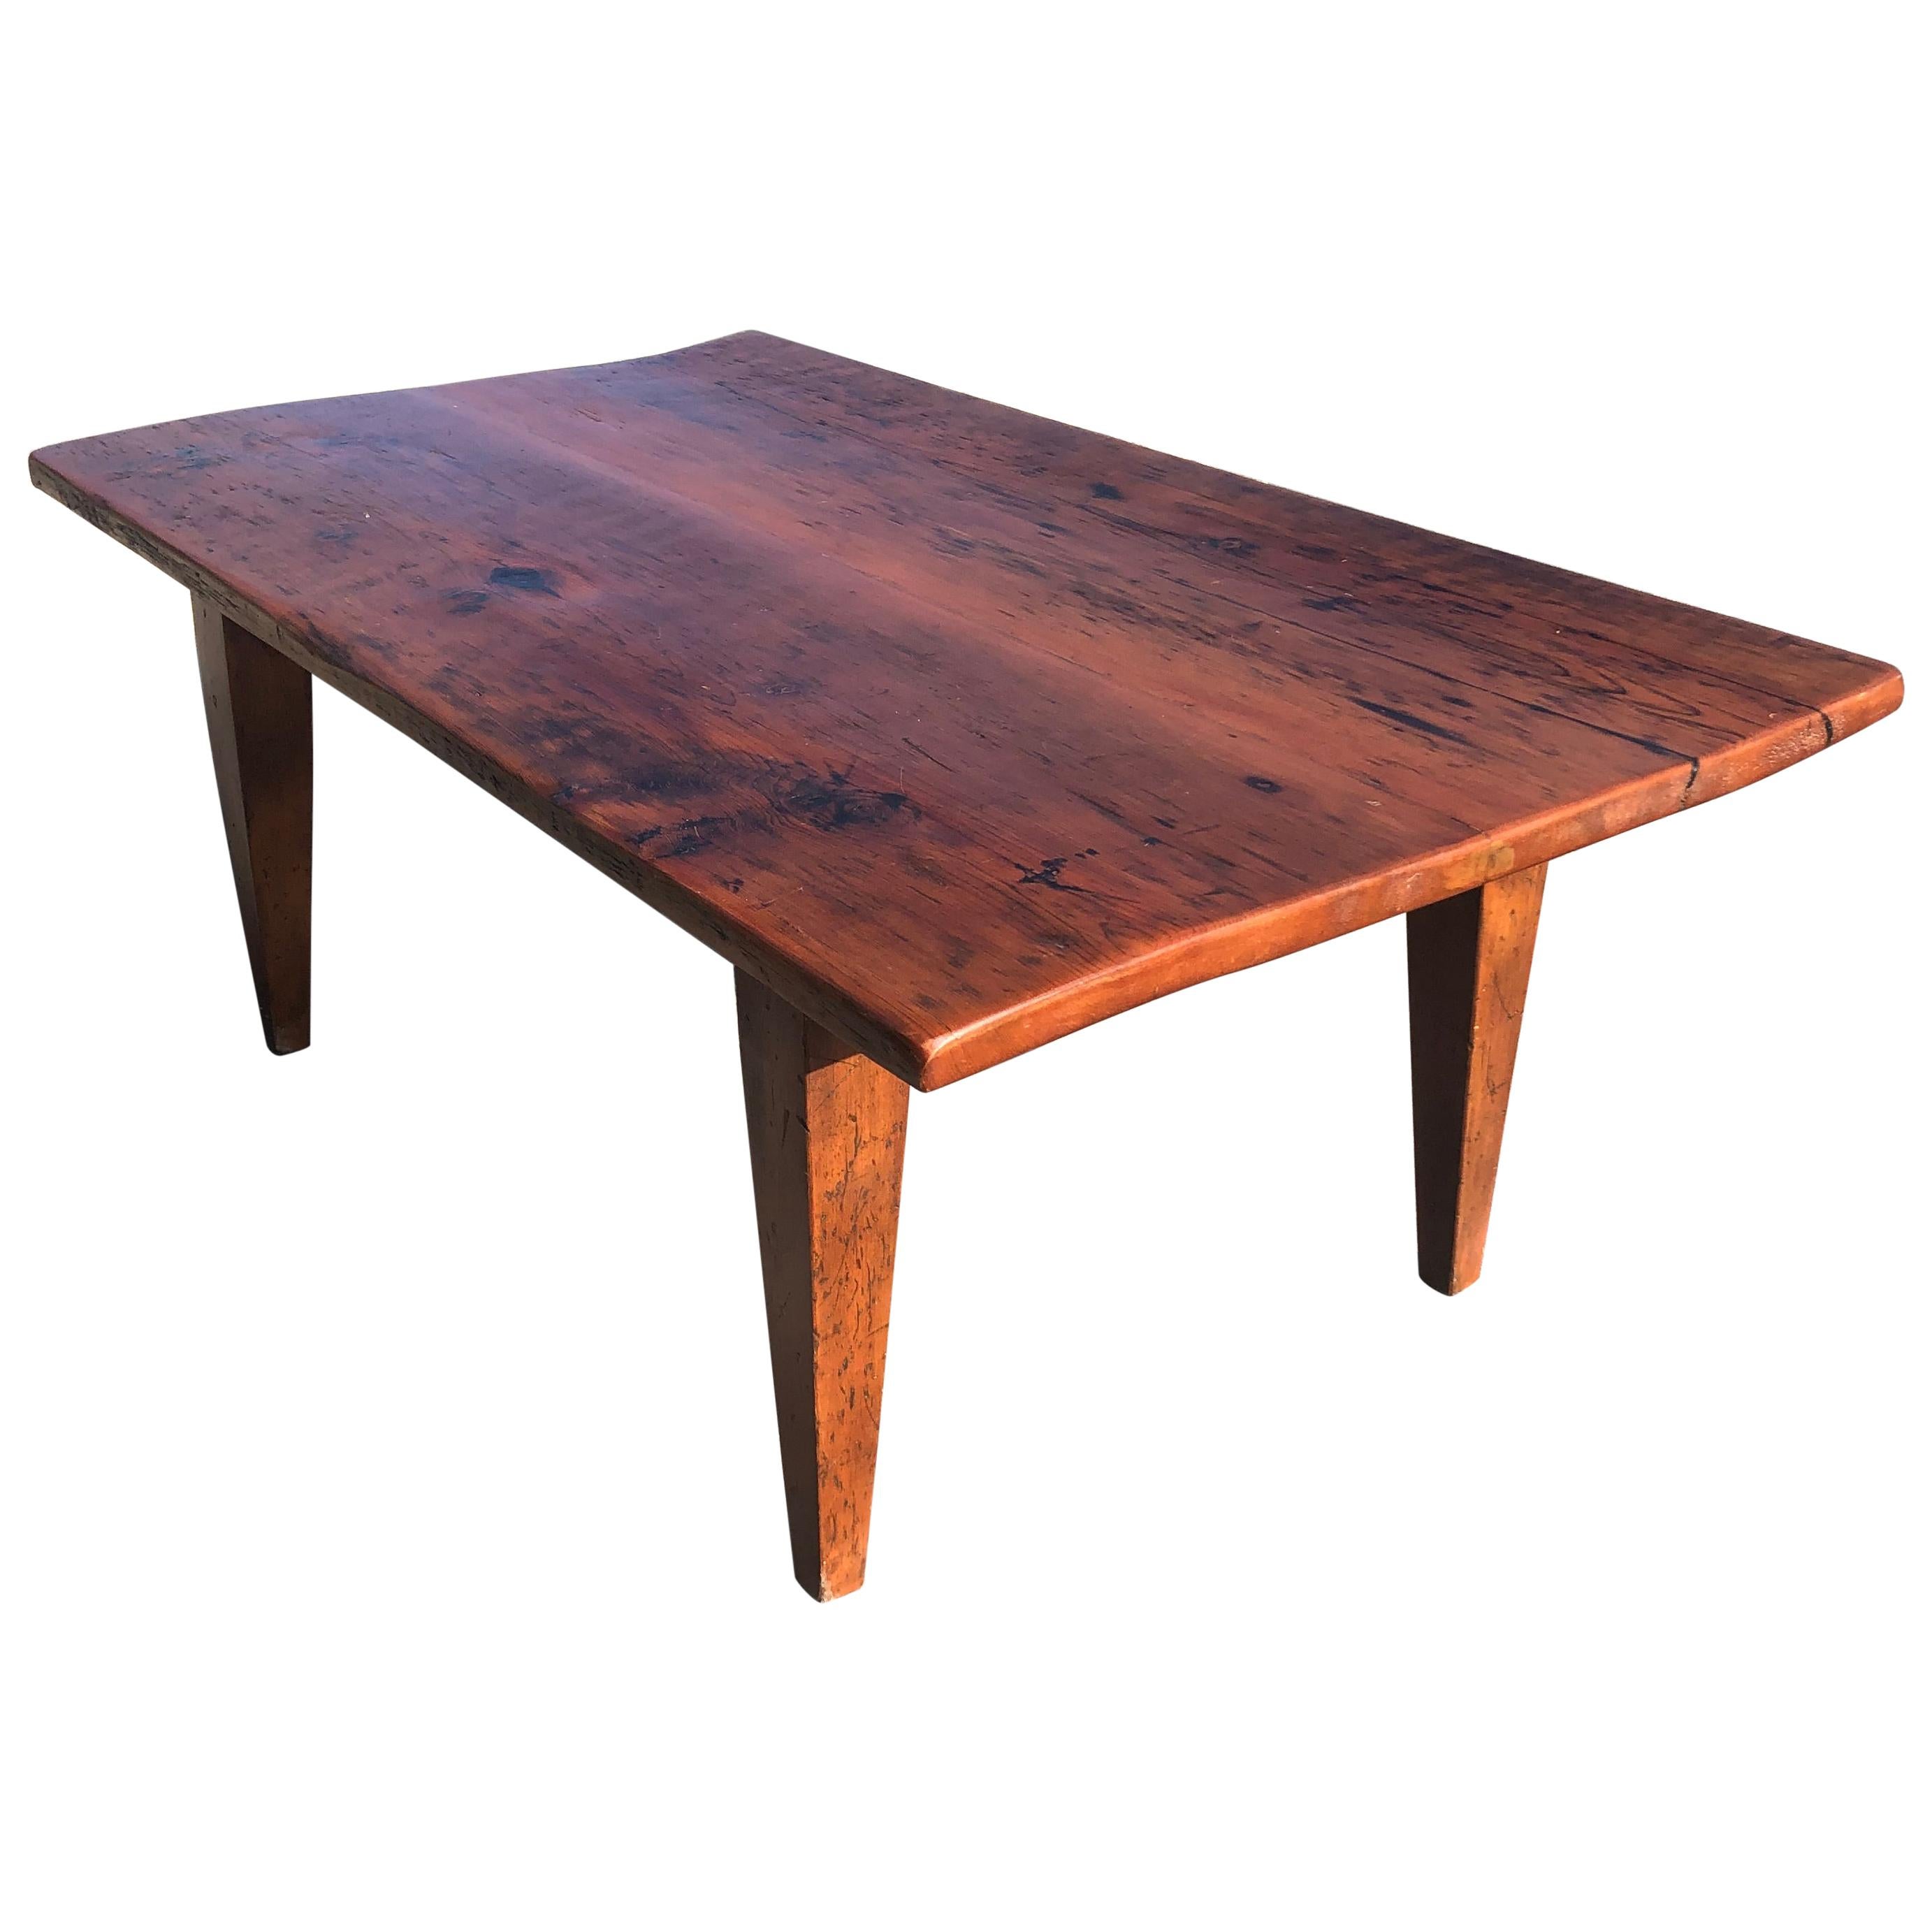 Handsome Rustic Maine Artisan Crafted Pine Coffee Table